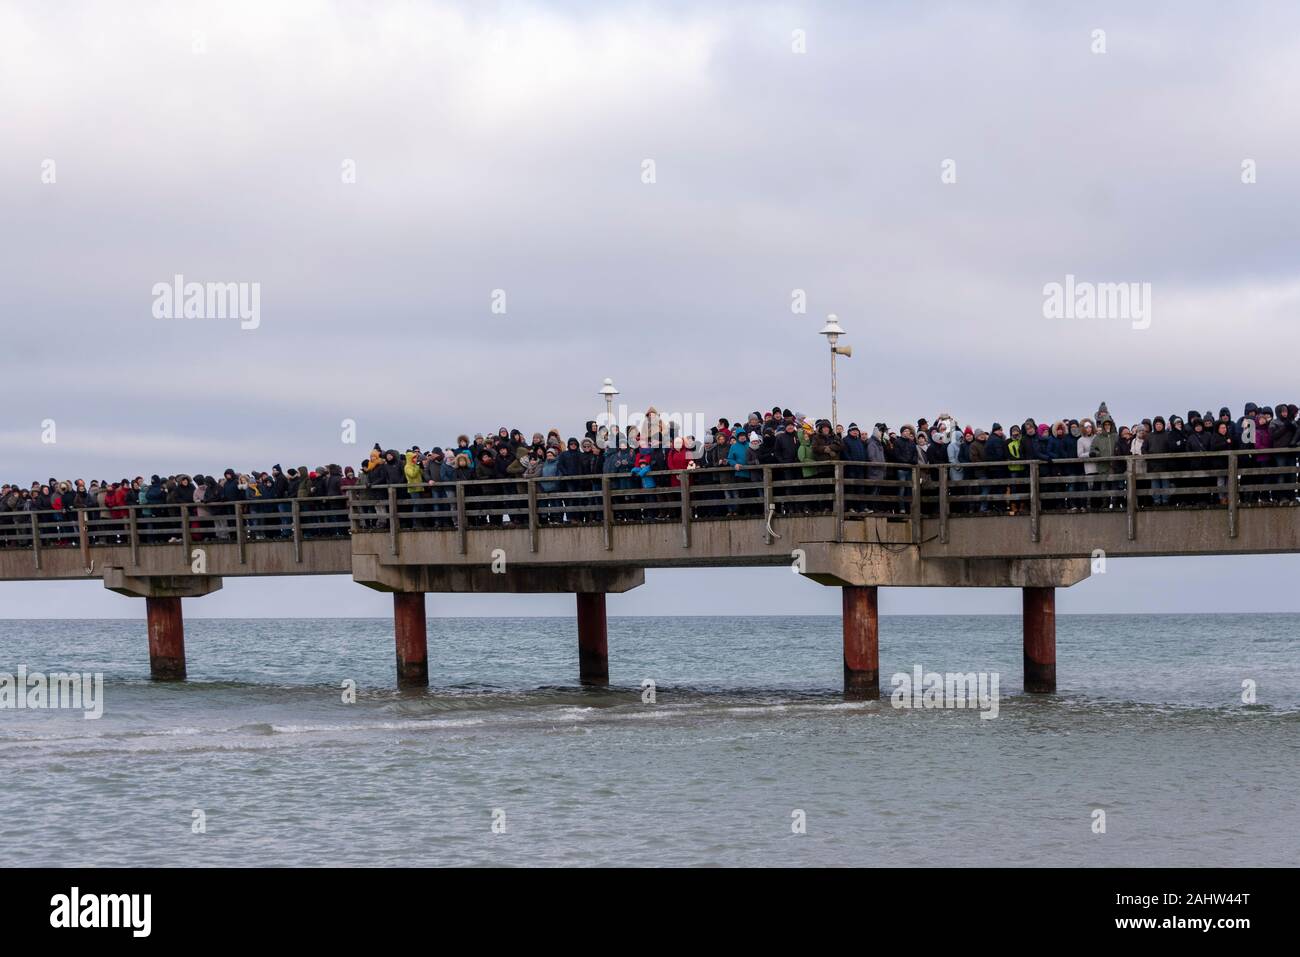 Prerow, Germany. 1st Jan 2020. Thousands of tourists stand on the pier in Prerow. They watch amateur swimmers swimming in the 5 degree cold Baltic Sea water during the traditional bathing in Prerow. Credit: Mattis Kaminer/Alamy Live News Stock Photo